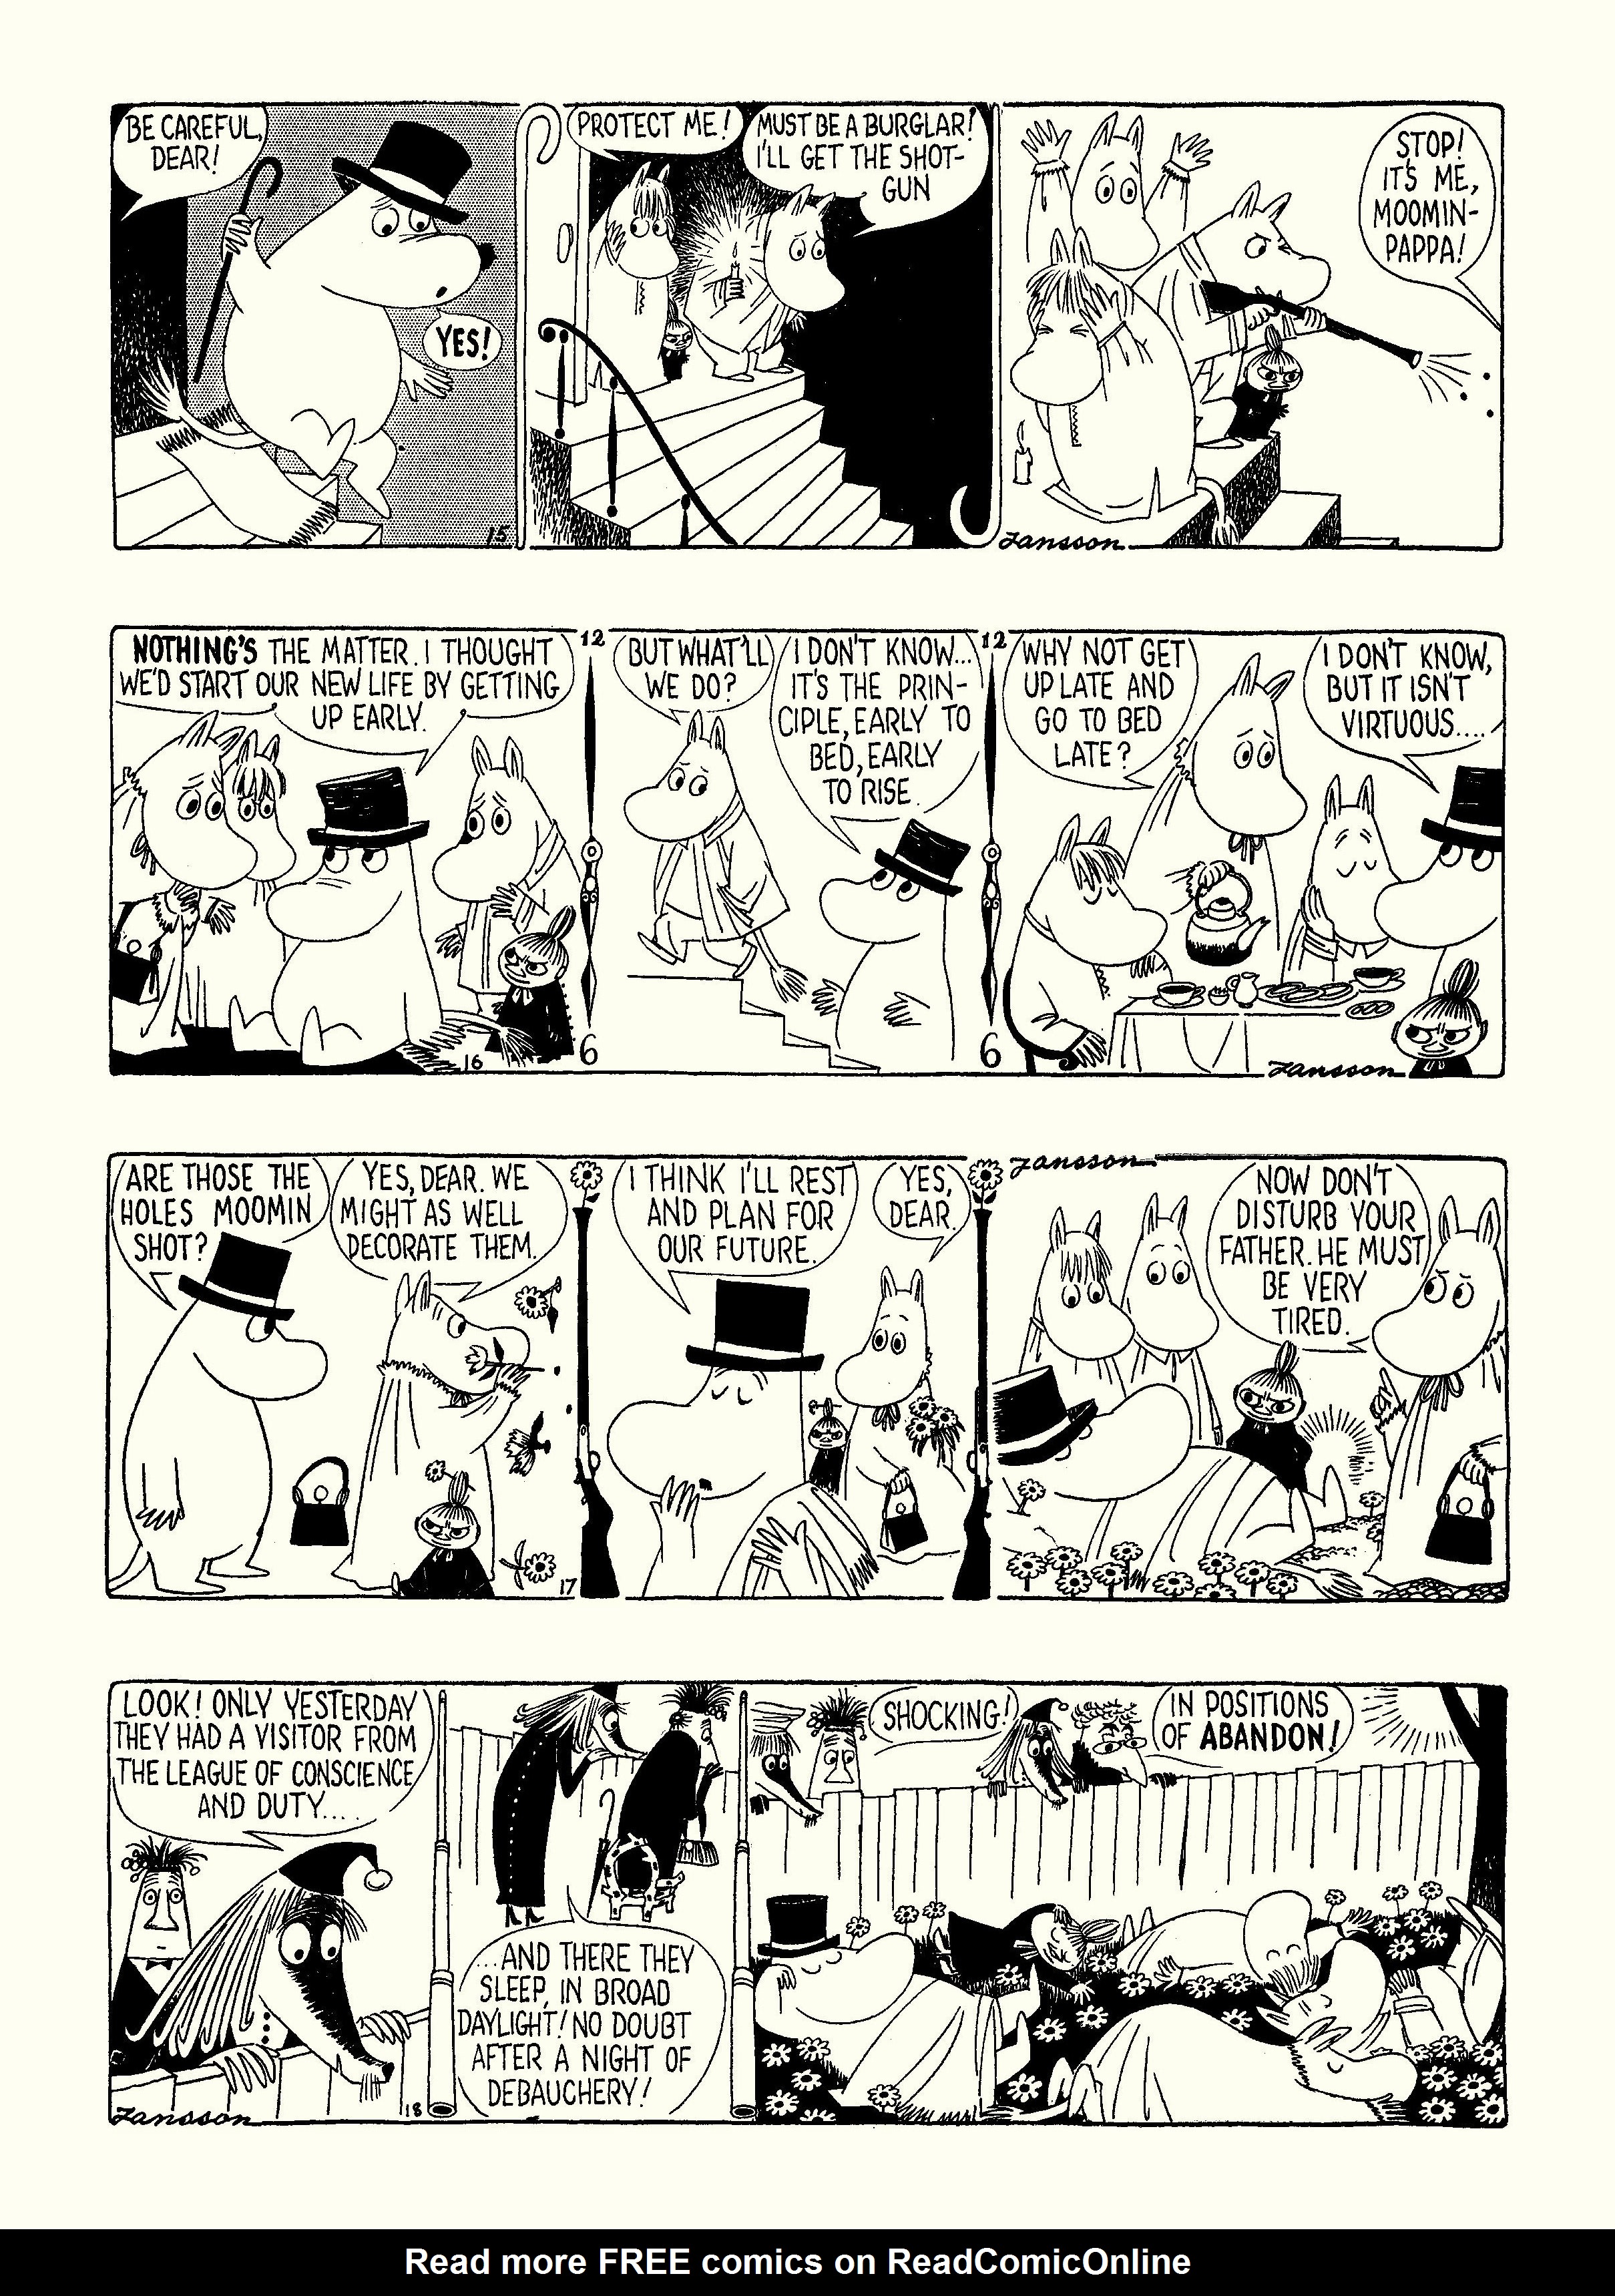 Read online Moomin: The Complete Tove Jansson Comic Strip comic -  Issue # TPB 4 - 41